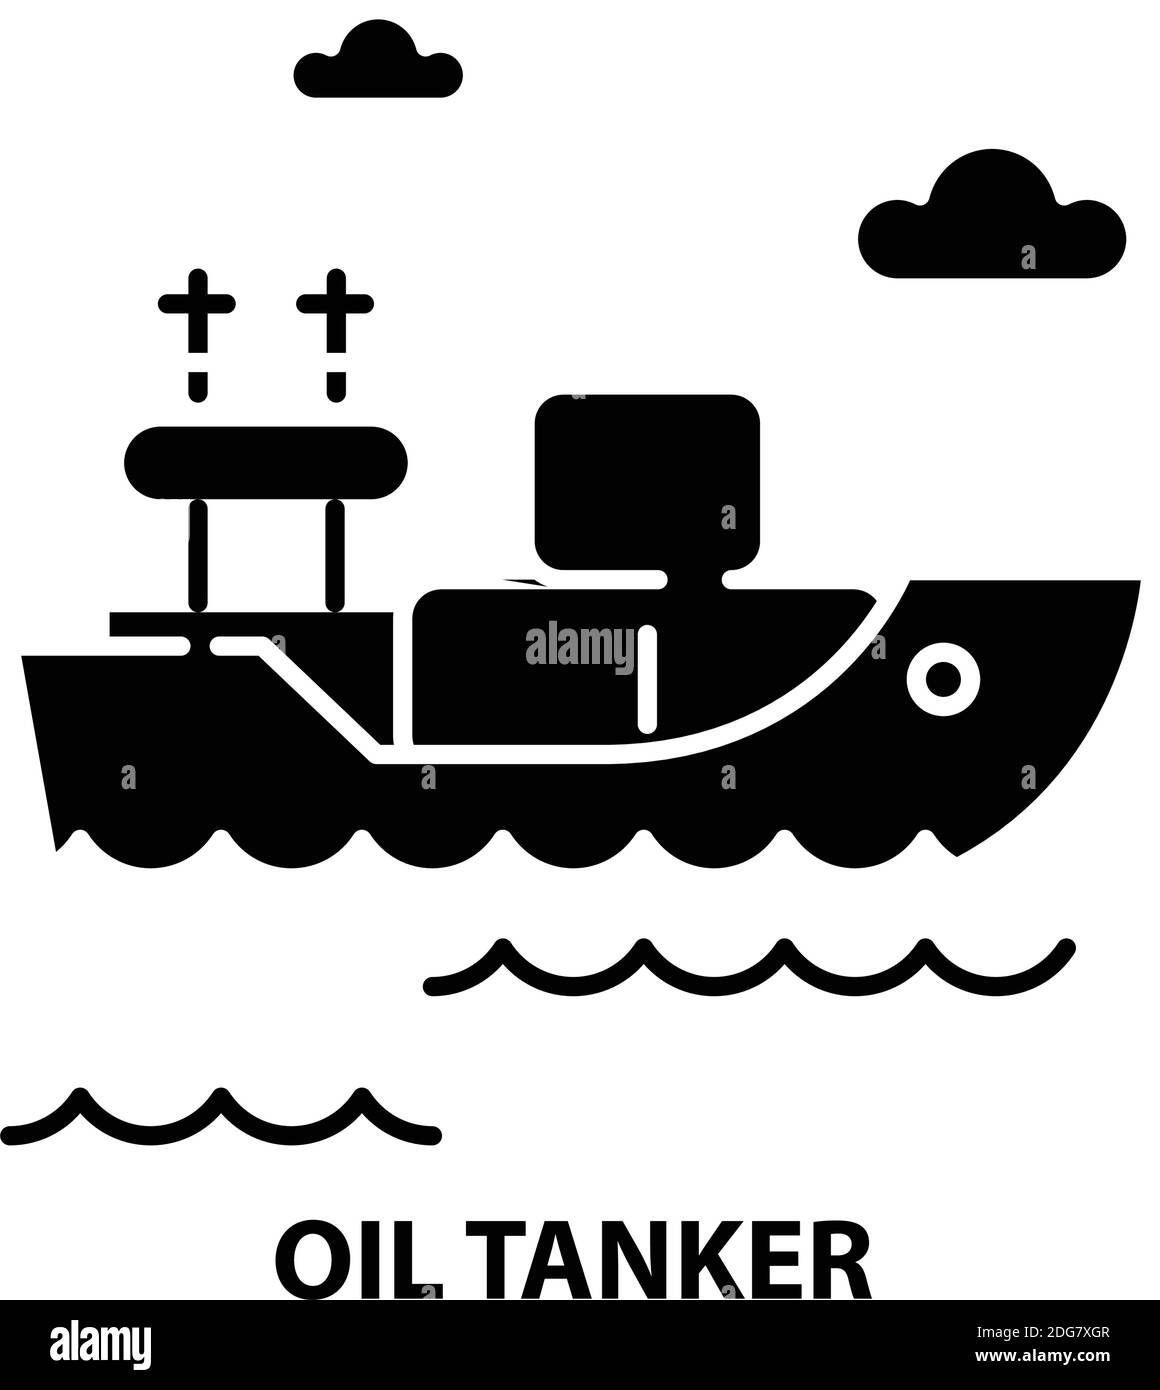 oil tanker icon, black vector sign with editable strokes, concept illustration Stock Vector